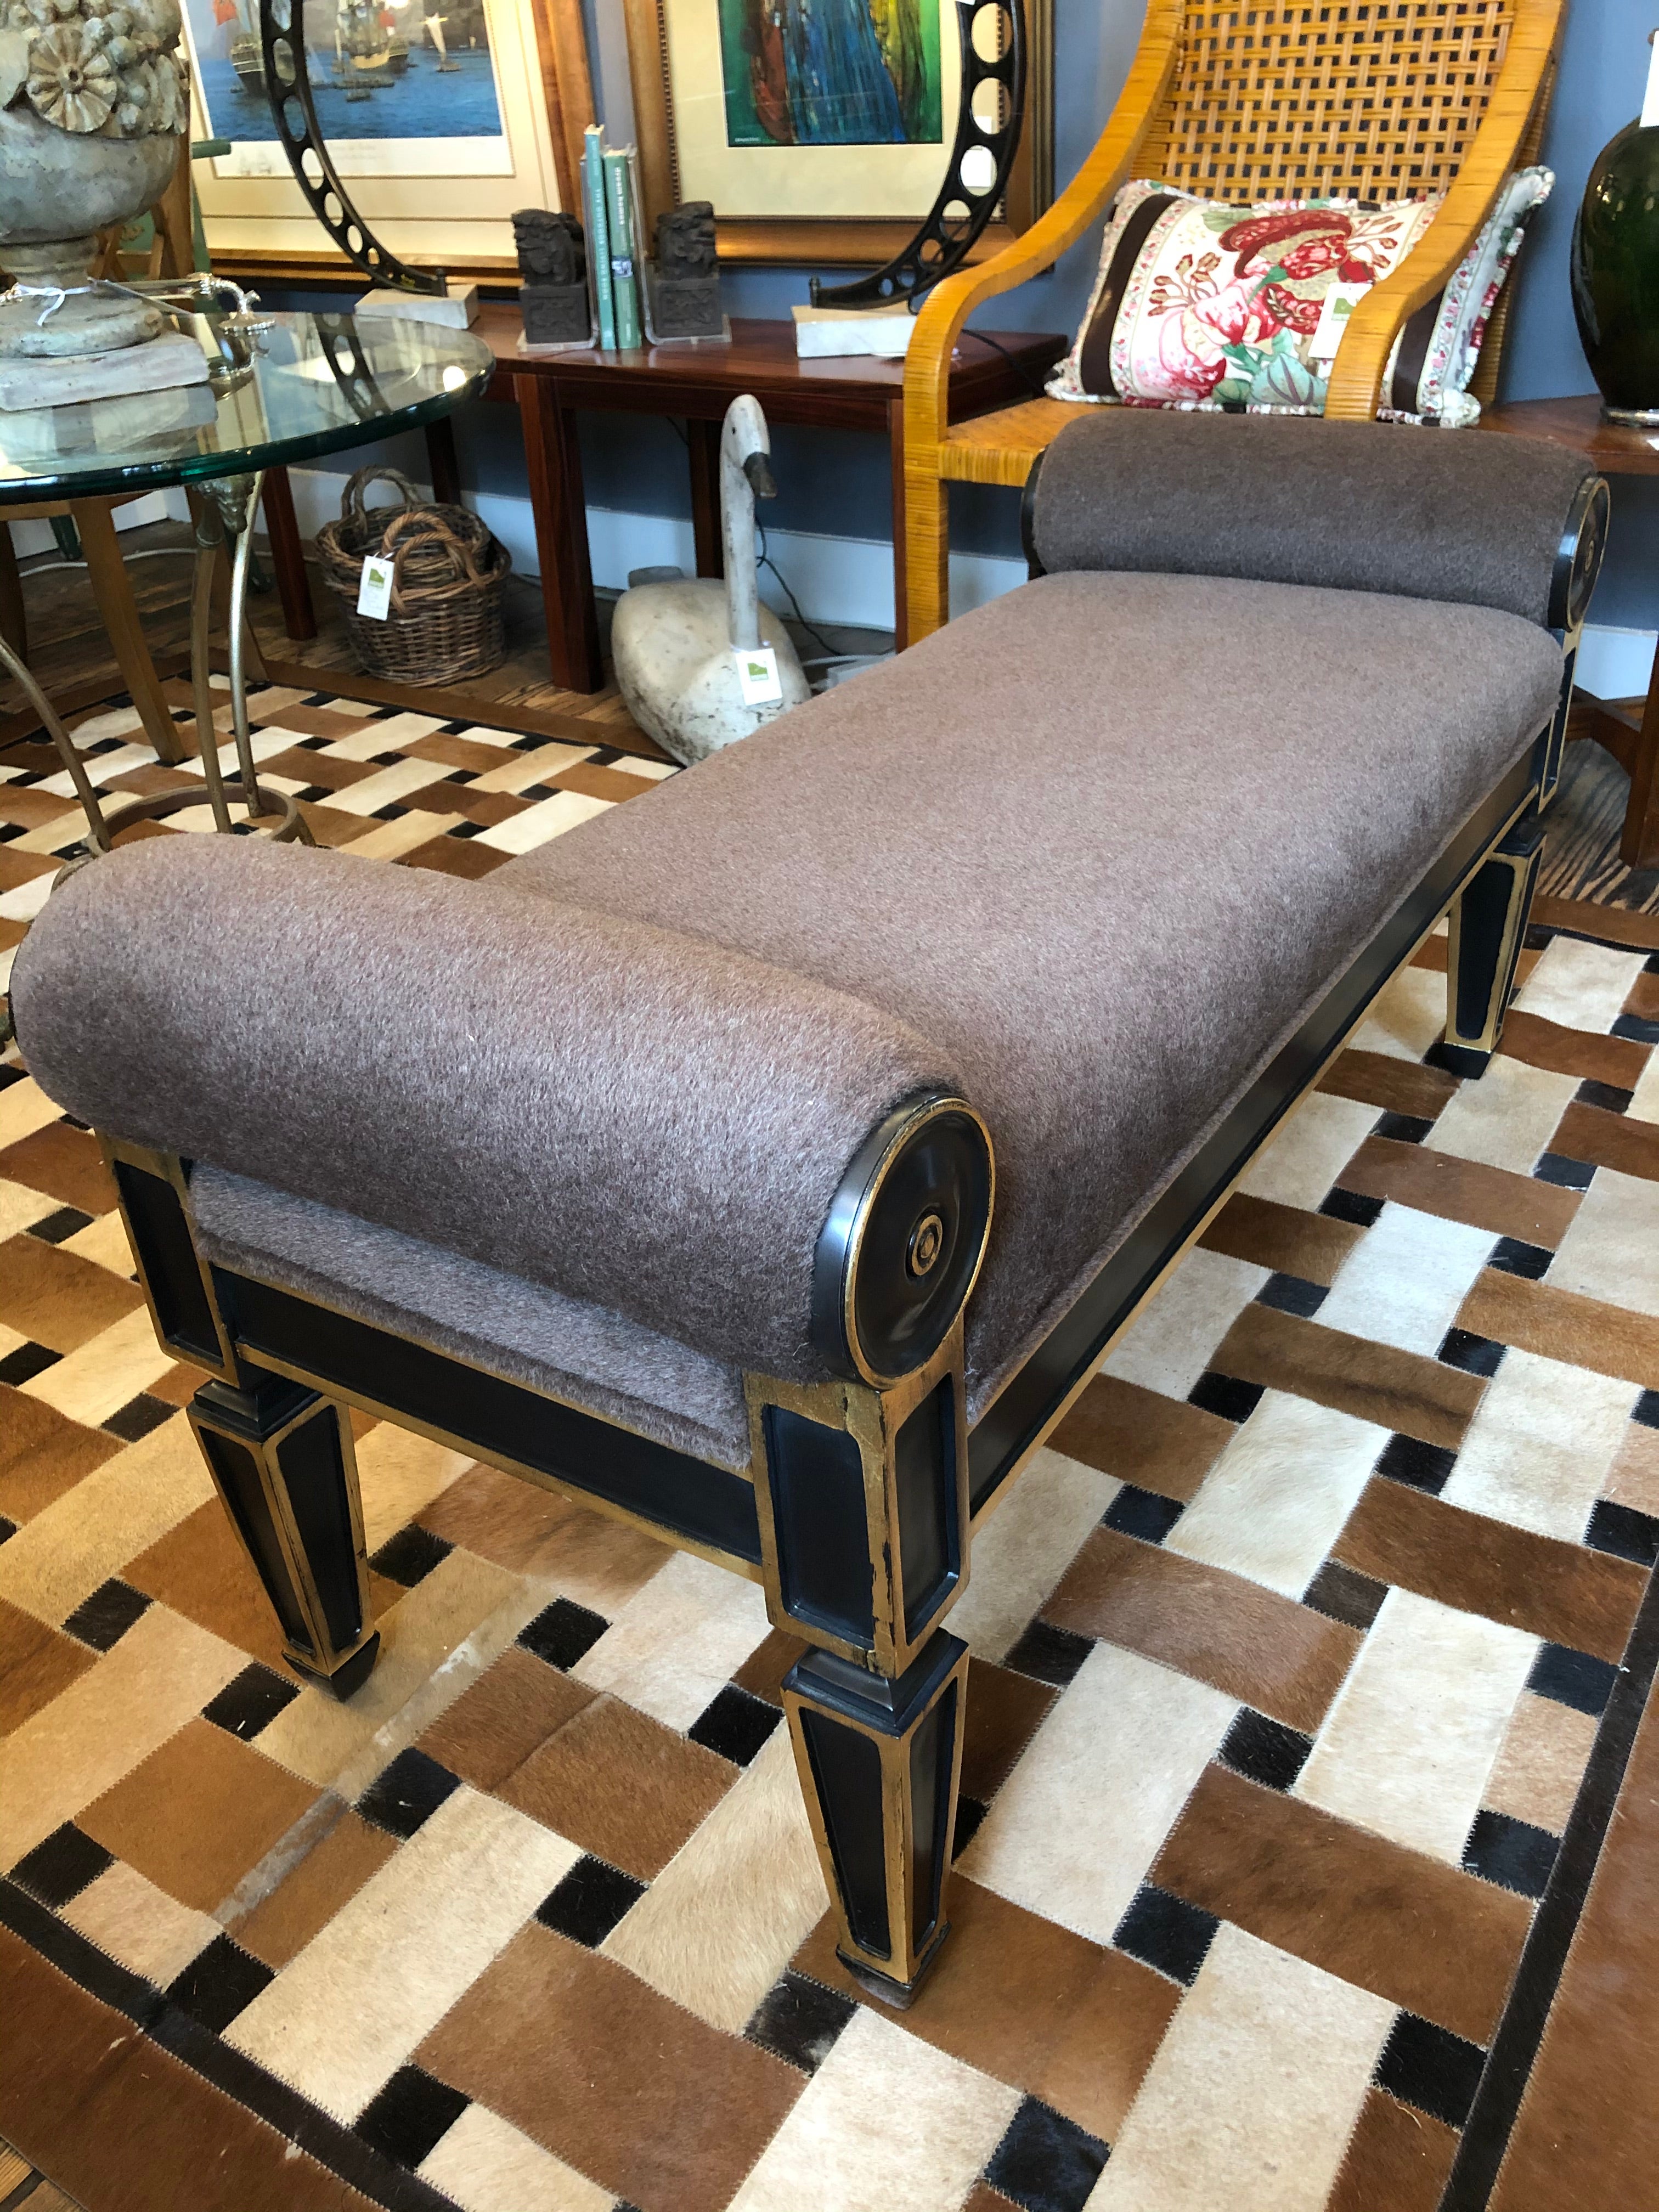 Super rich looking Hollywood Regency inspired designer bench having ebonized and gilded base with taupe plush mohair upholstery.